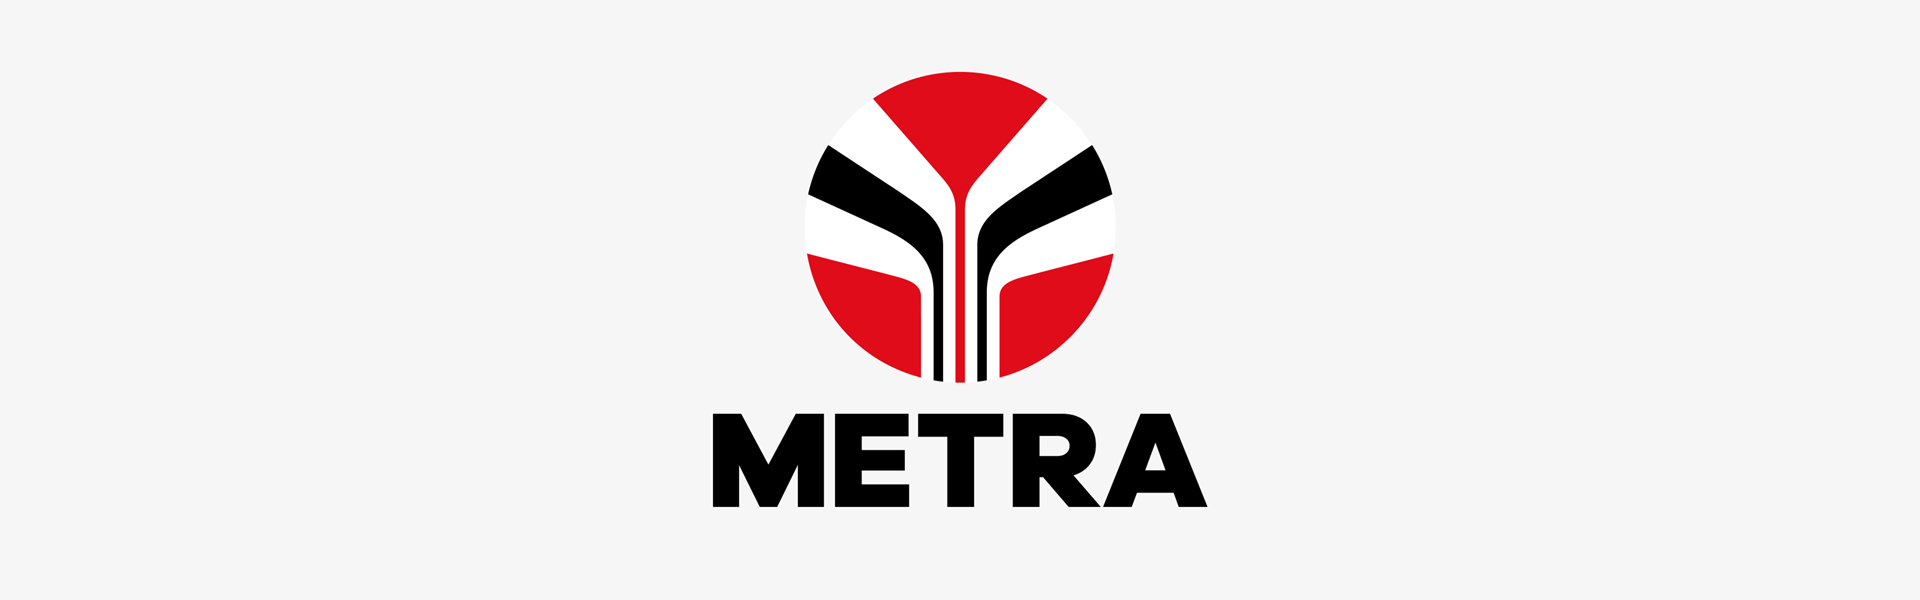 Also Metra SPA has chosen the quality and experience of Cablesteel